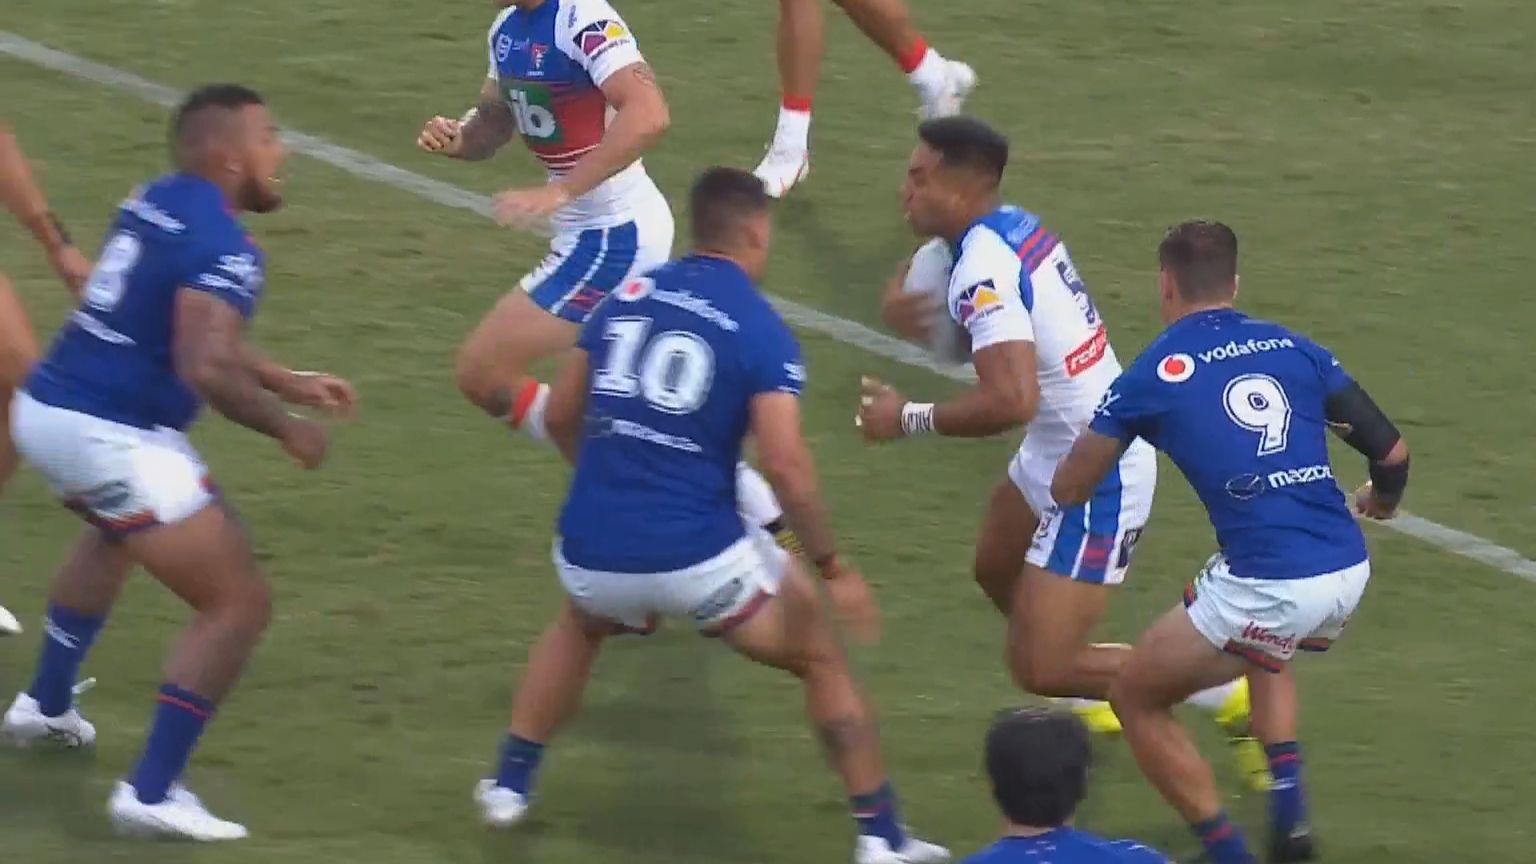 Jamayne Taunoa-Brown could be suspended for a month for crusher tackle against Newcastle